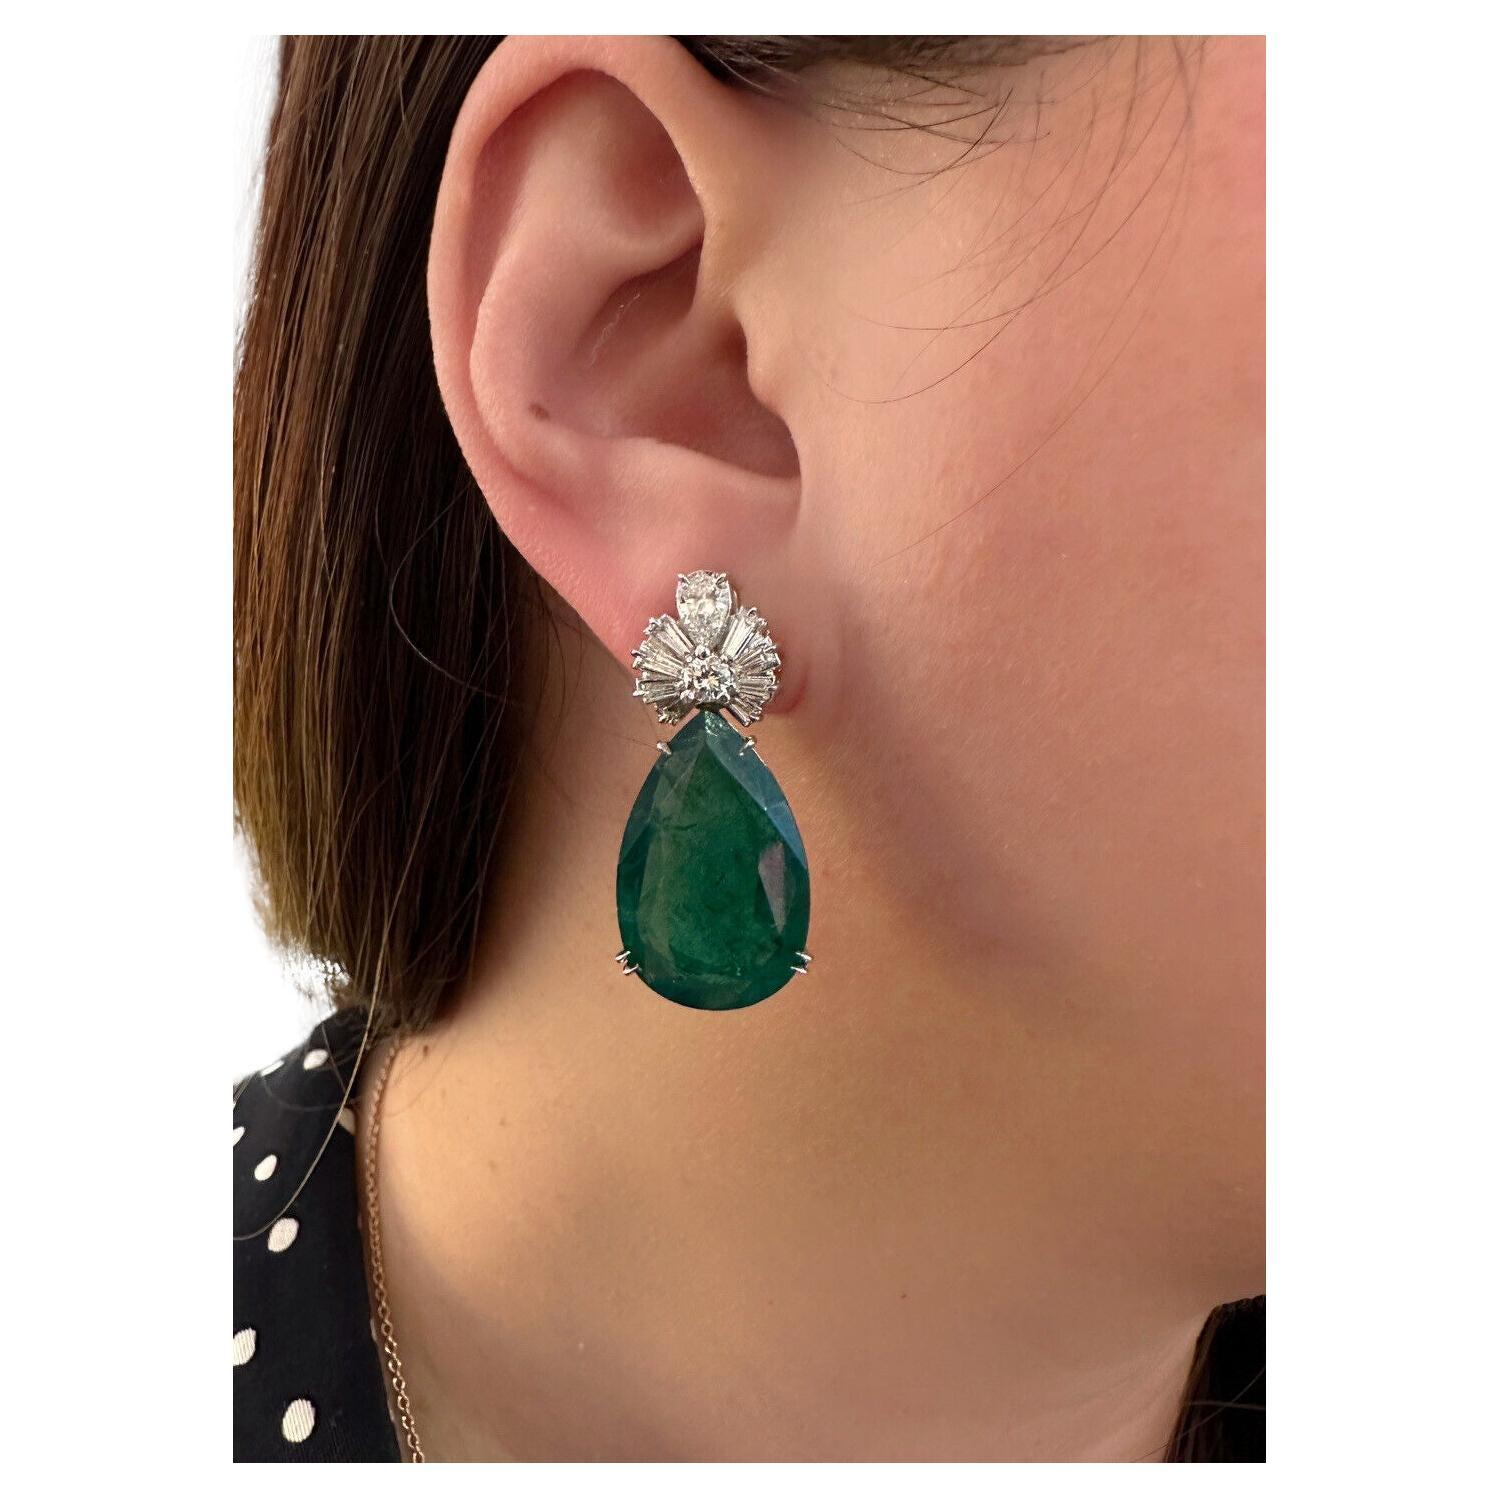 GIA Pear Emeralds 31.17 Carat Total Weight & Diamond Earrings in 18k White Gold For Sale